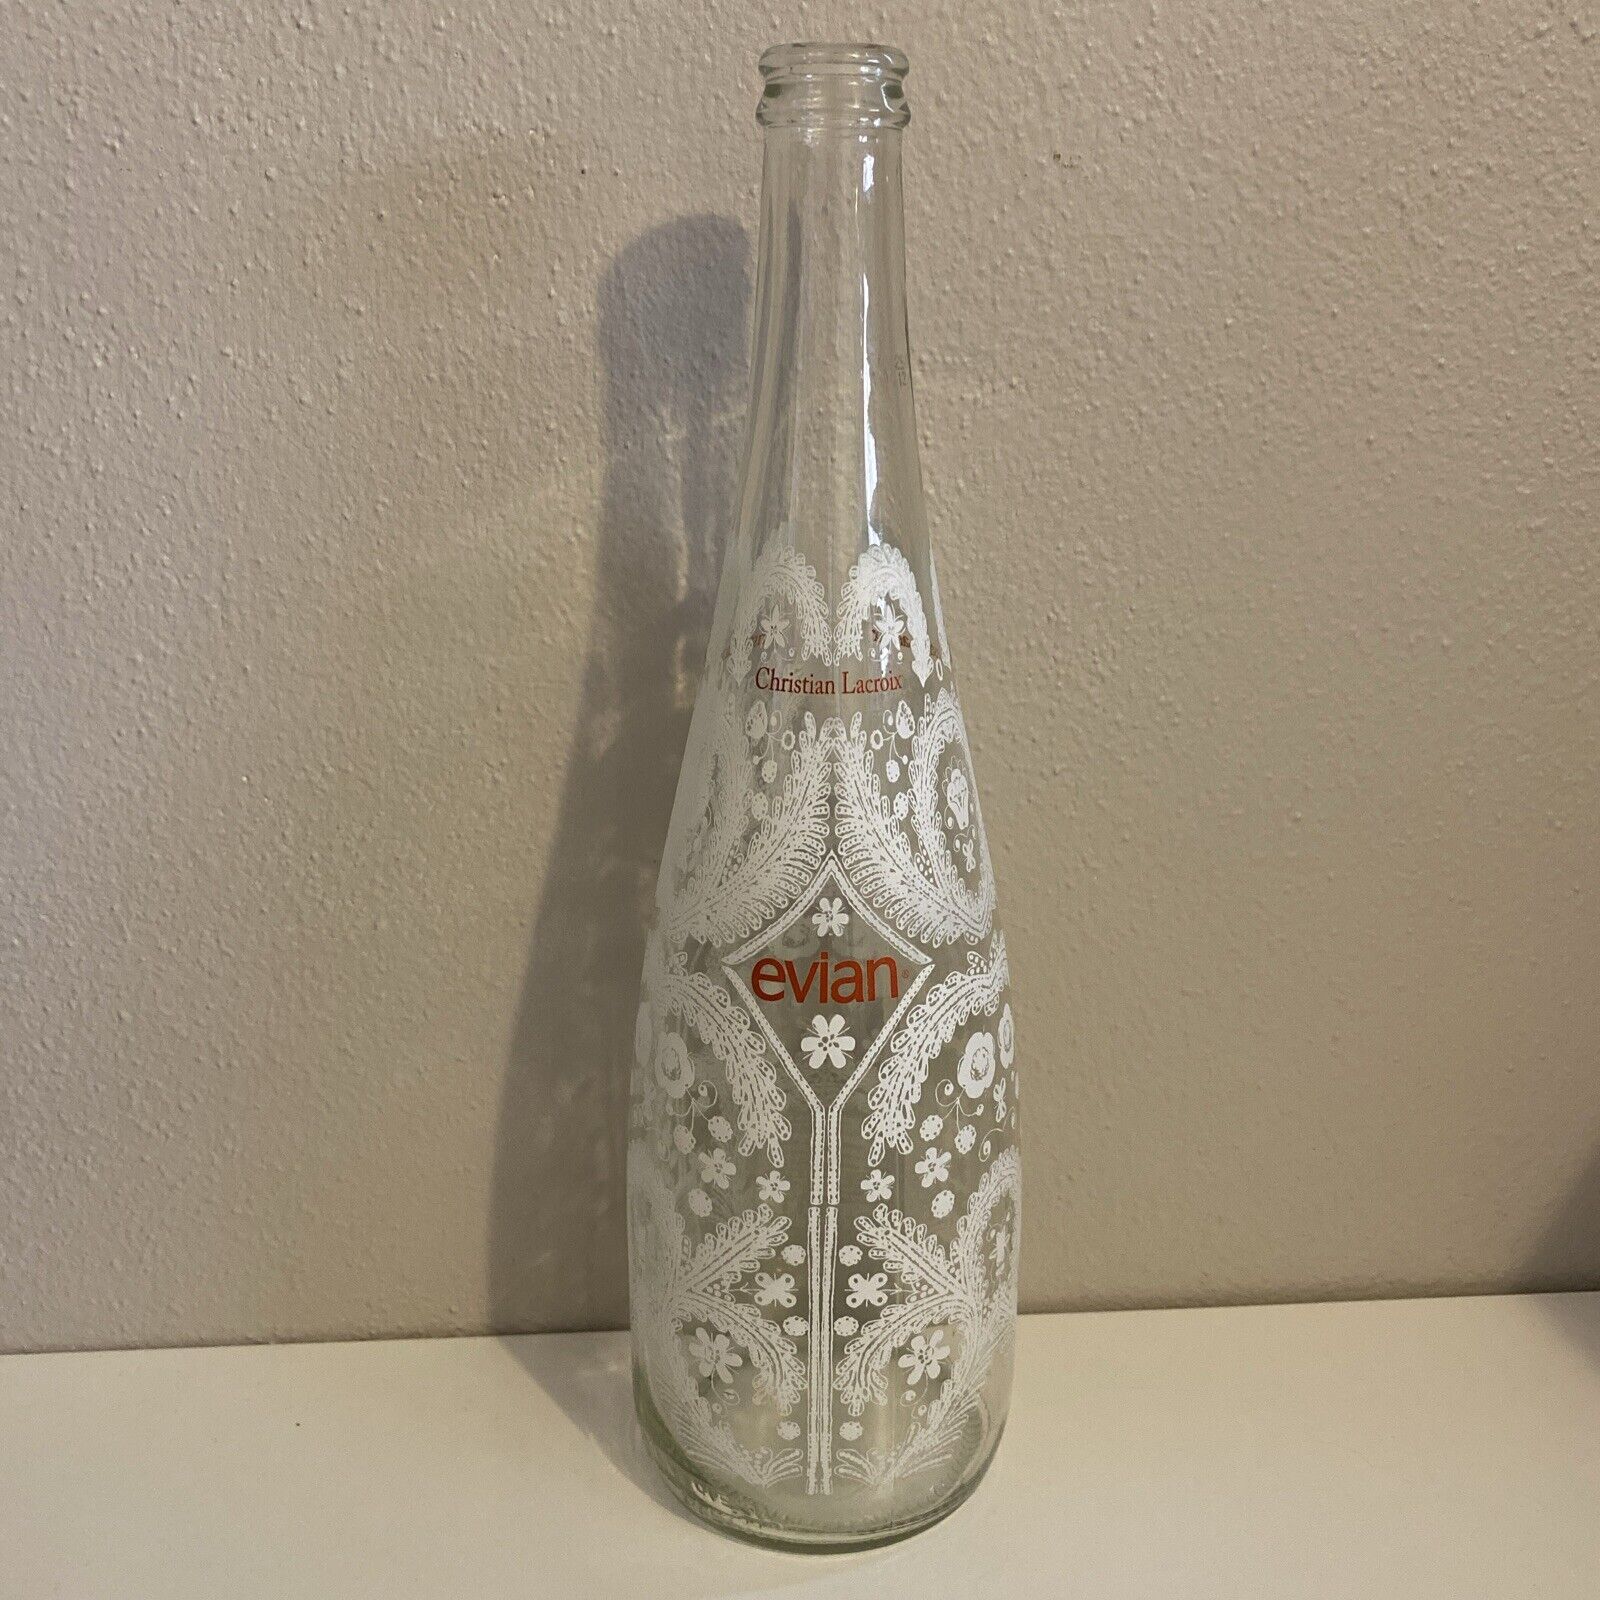 Evian Christian Lacroix 2008 Collectible Glass Water Bottle White Floral Lace